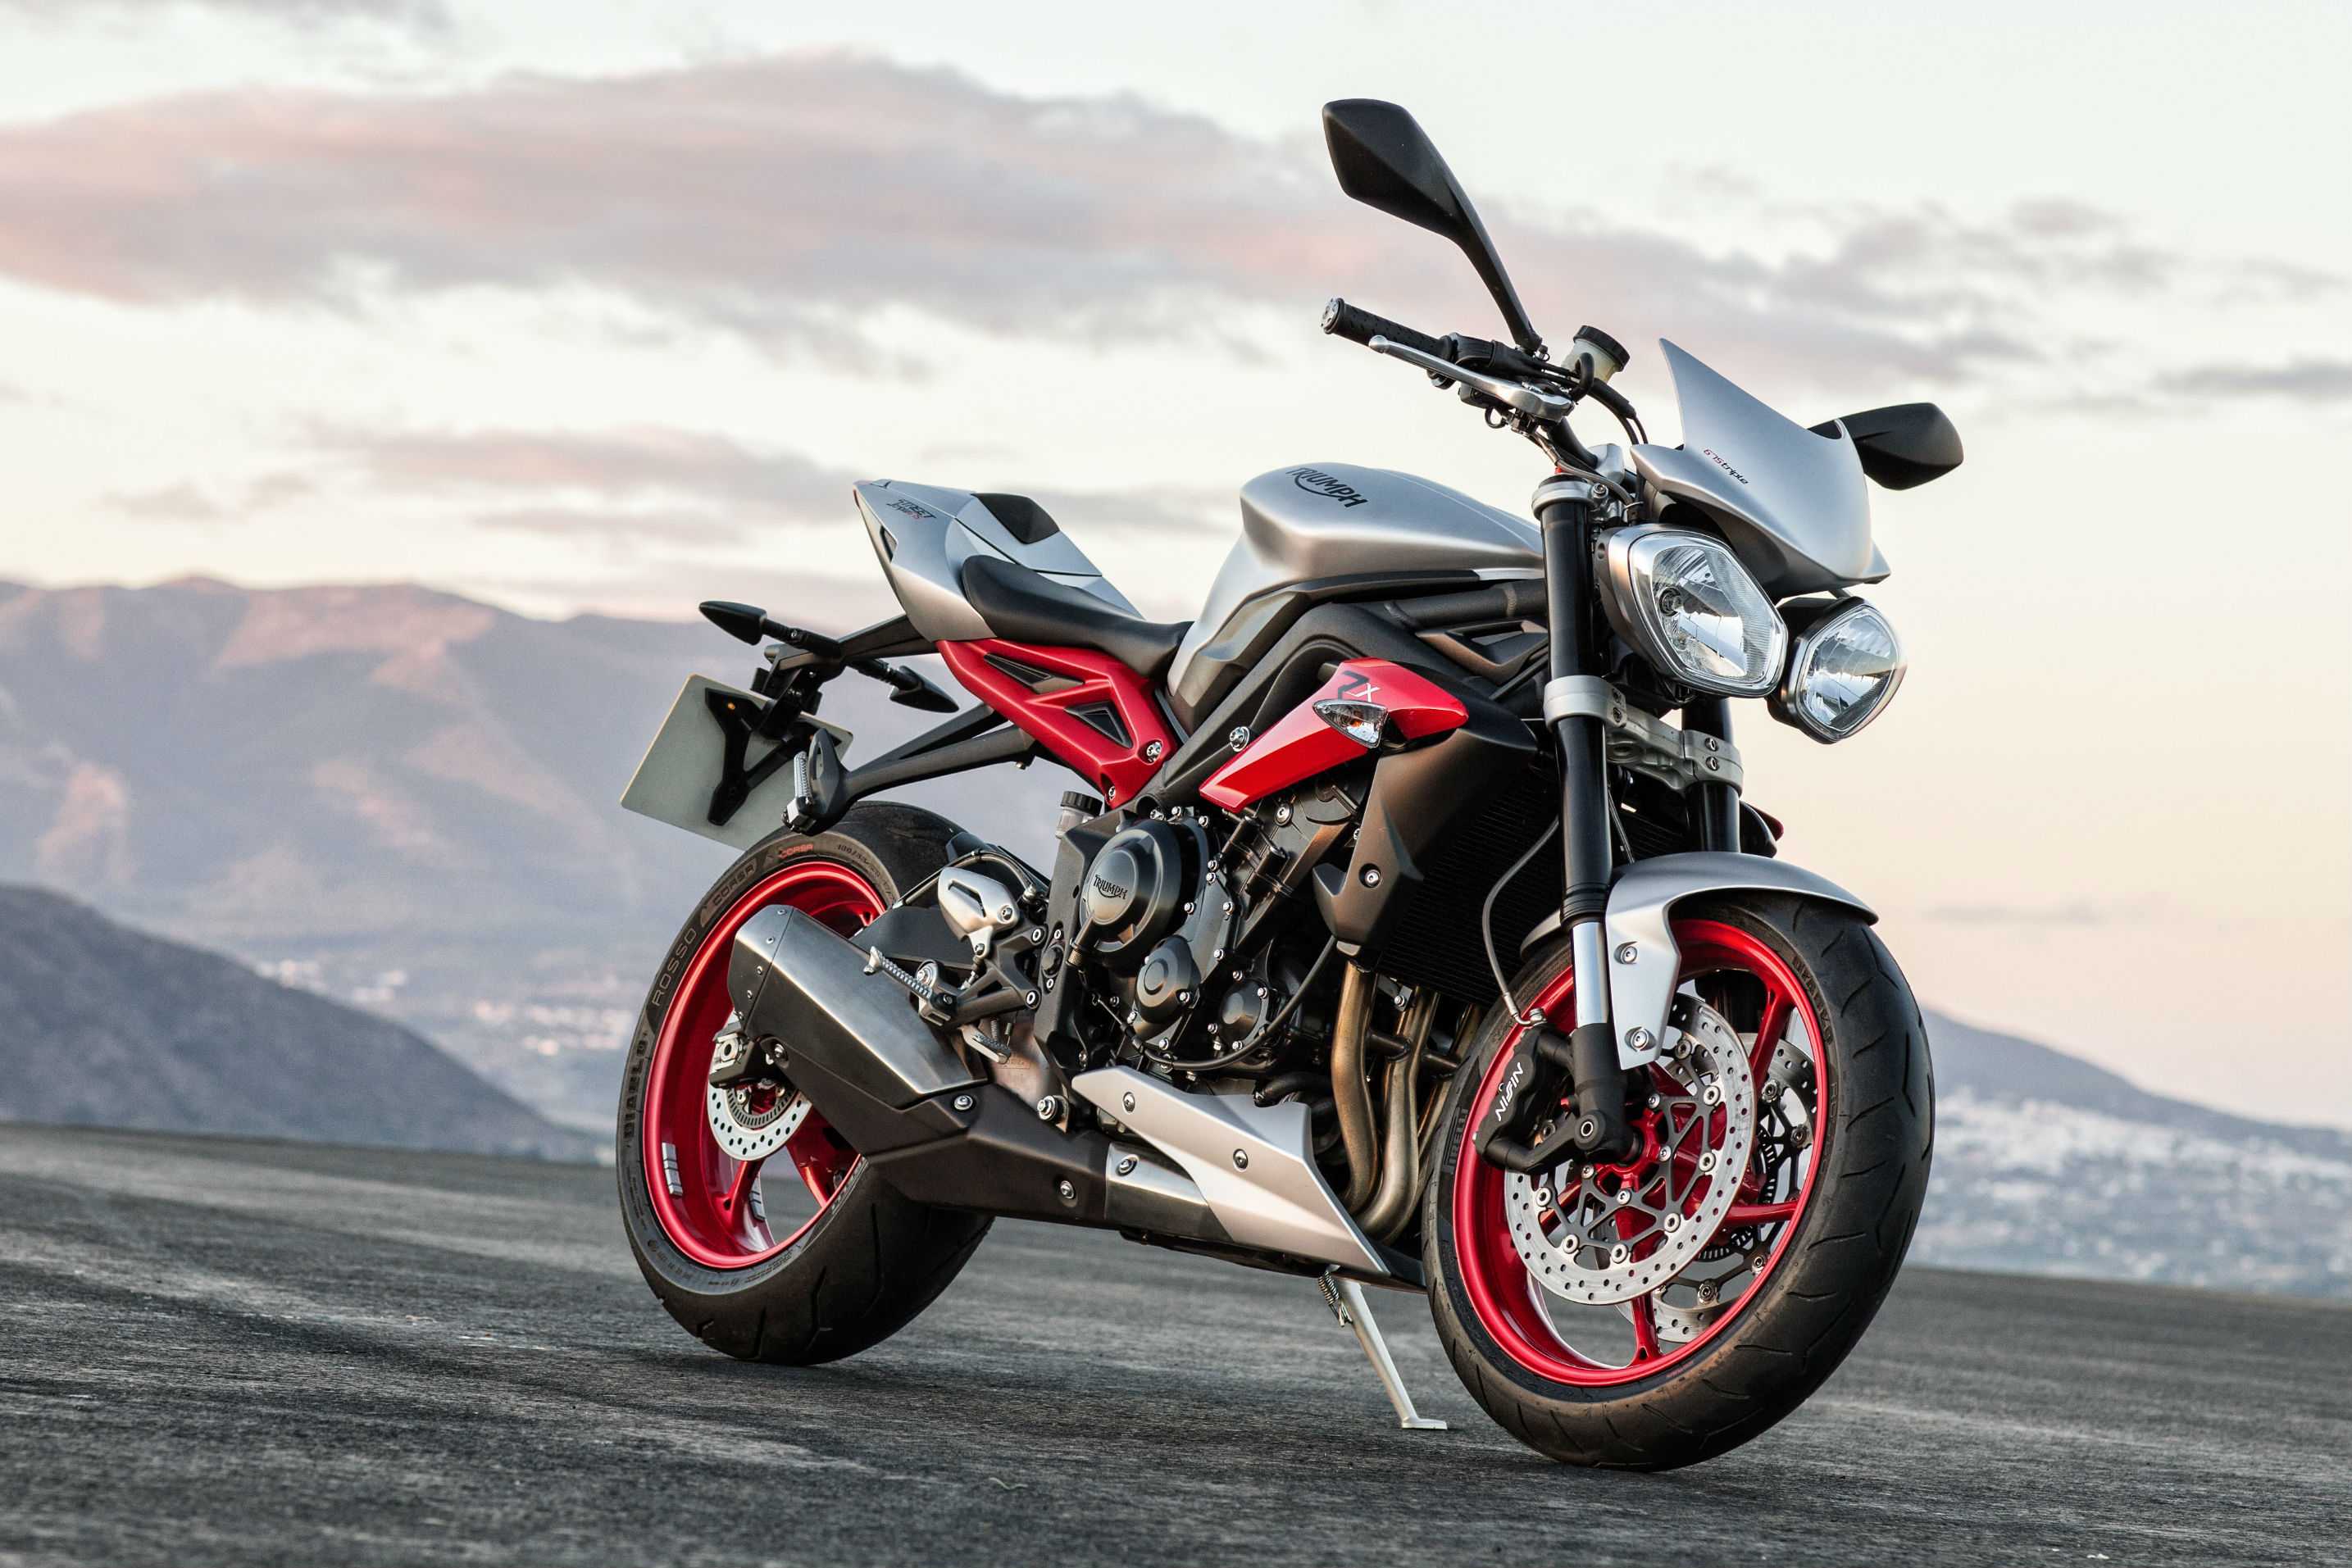 Top 10 best-selling bikes over 125cc